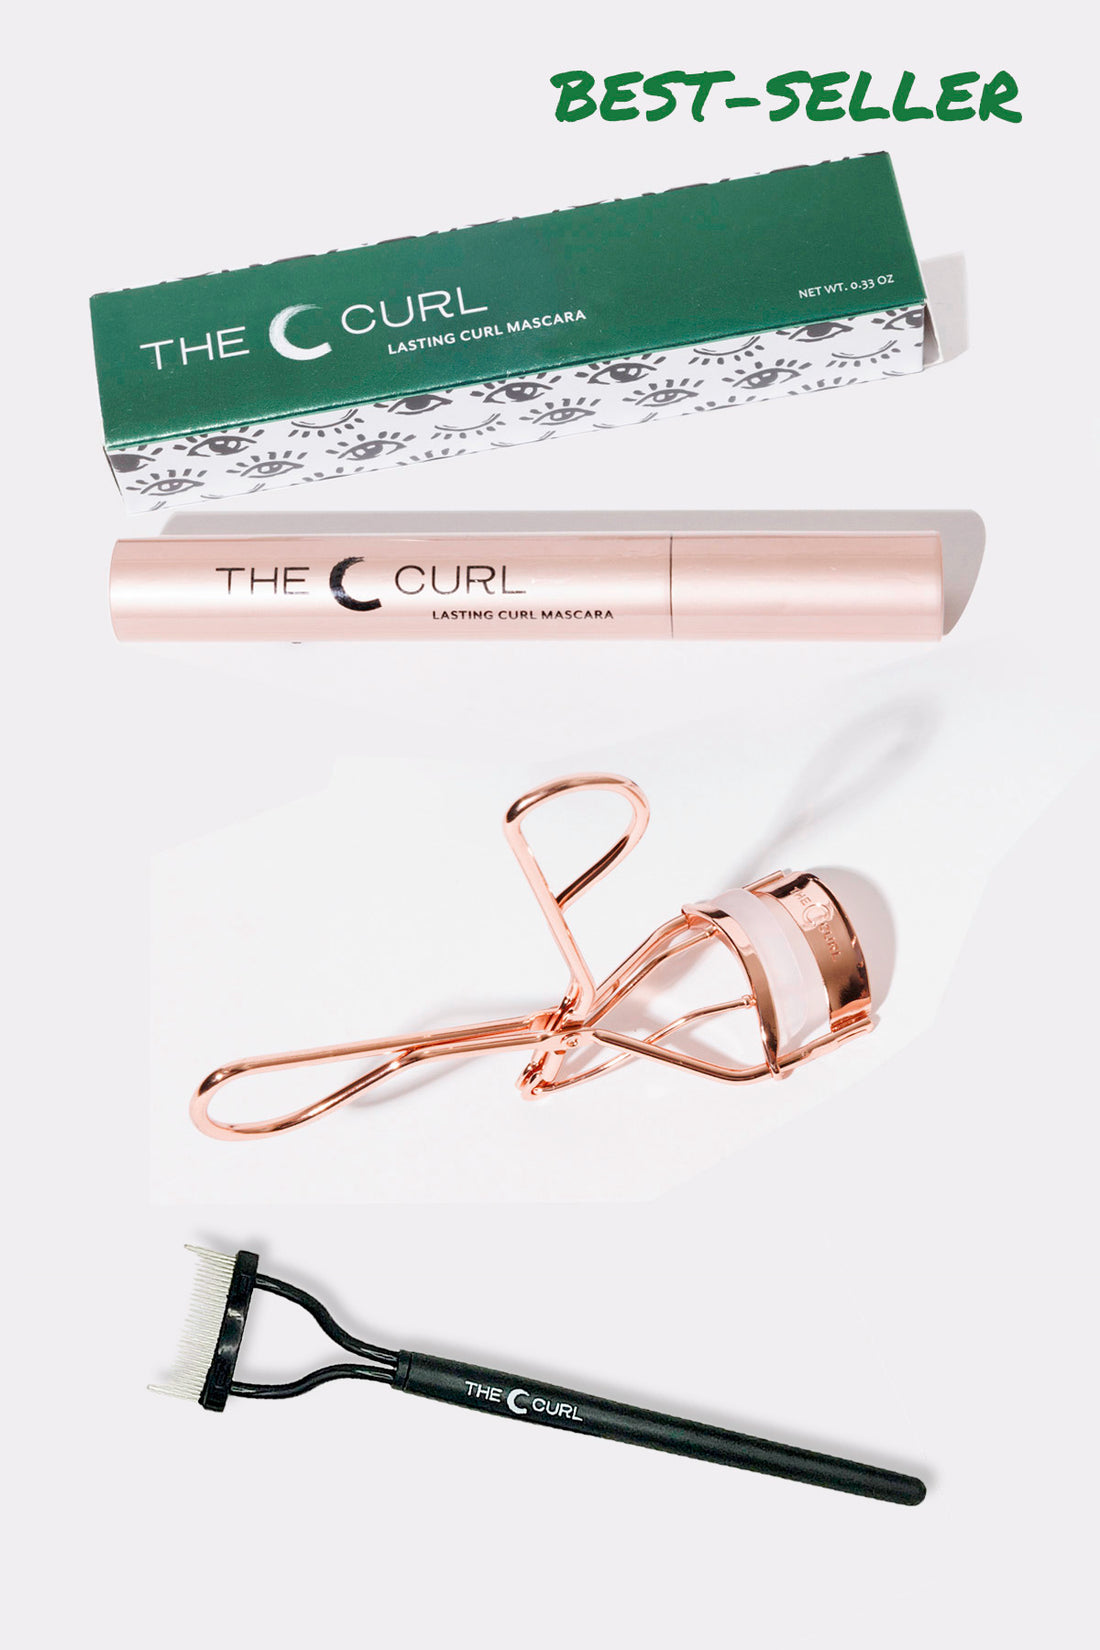 The Kit - C Curl, Lasting Curl Mascara + Comb + free shipping